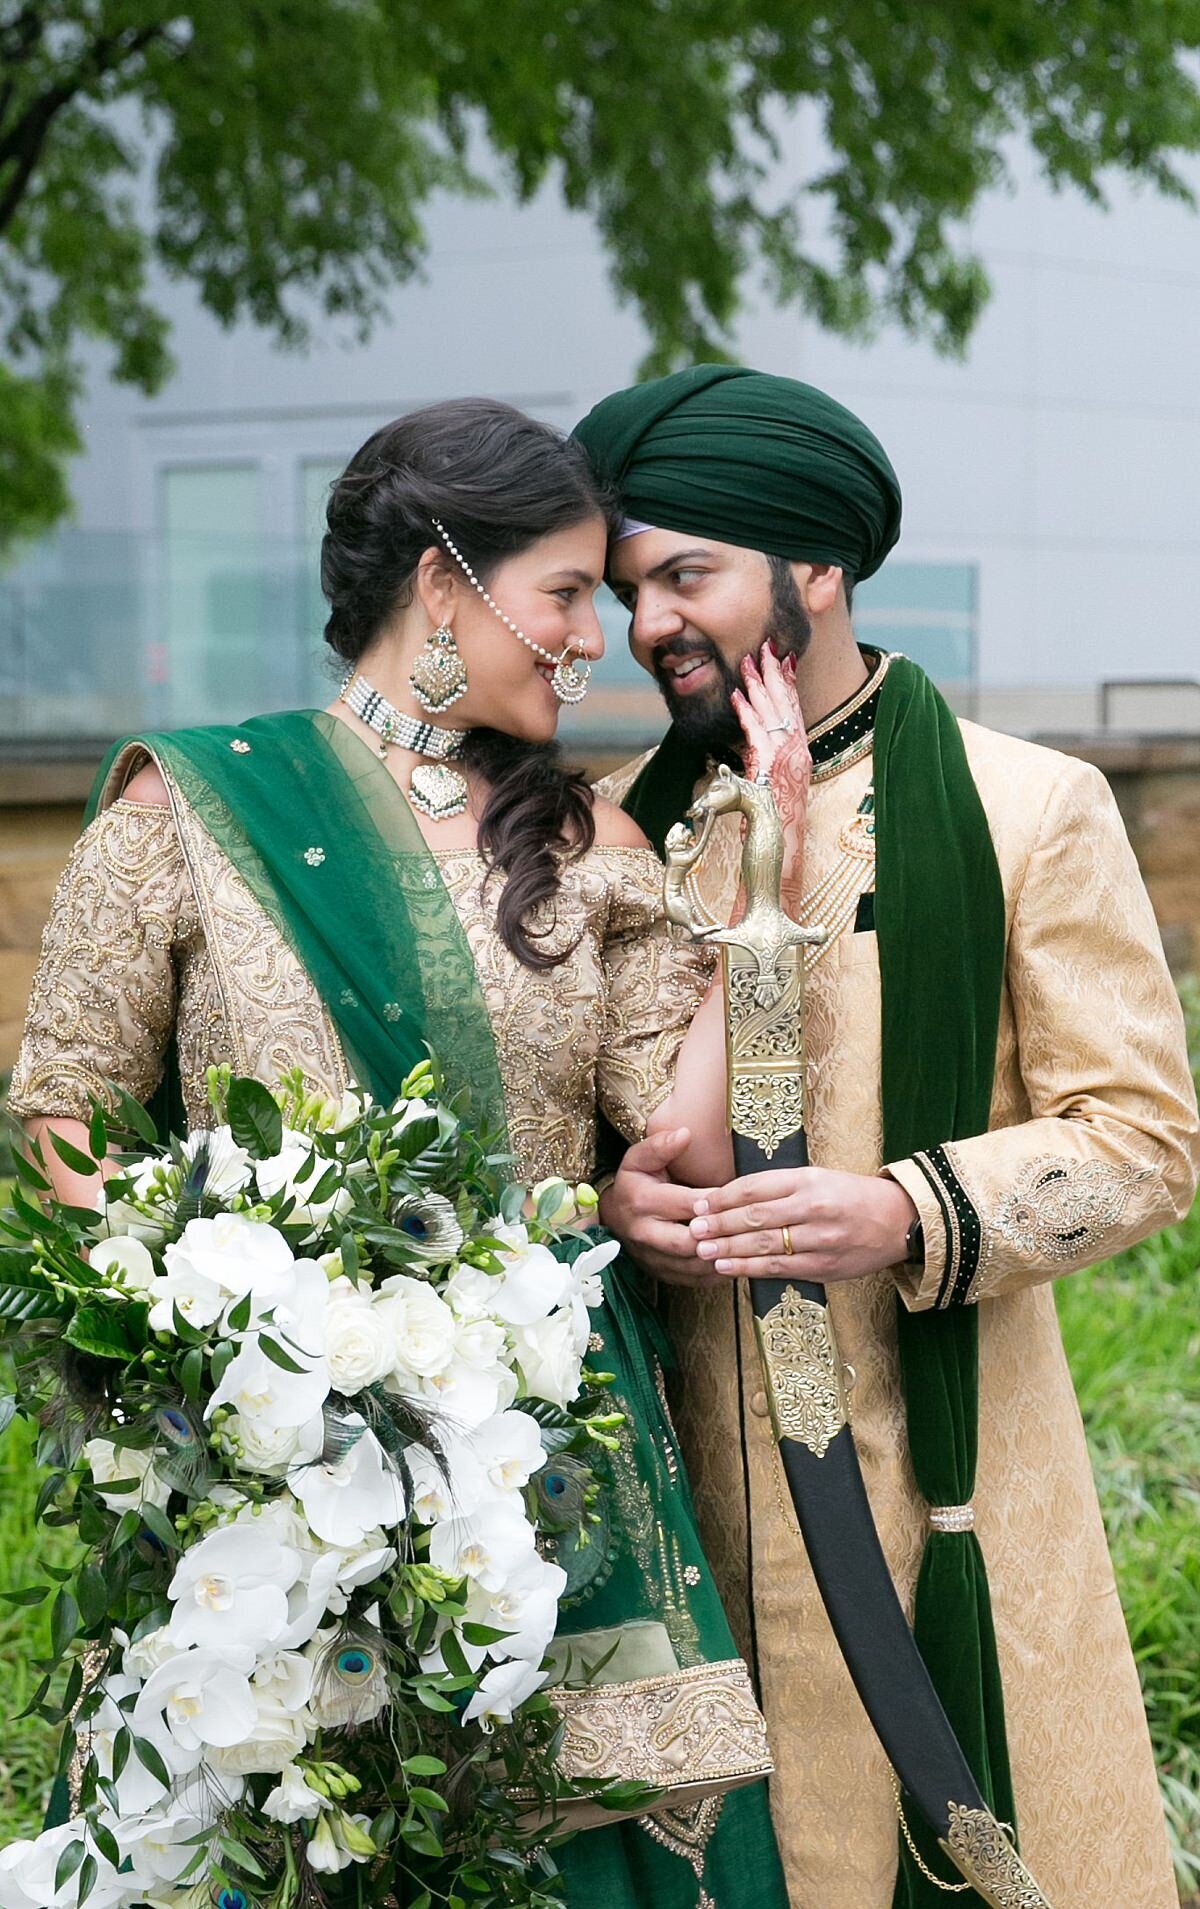 Sheikh groom wearing a green and gold sherwani and green turban holds a black sword with gold filagree ad he looks at the Indian bride. Hindu bride wearing a gold saree with a green dupatta holds a cascading bouquet of white orchids as she looks into the groom's eyes in Nashville, TN